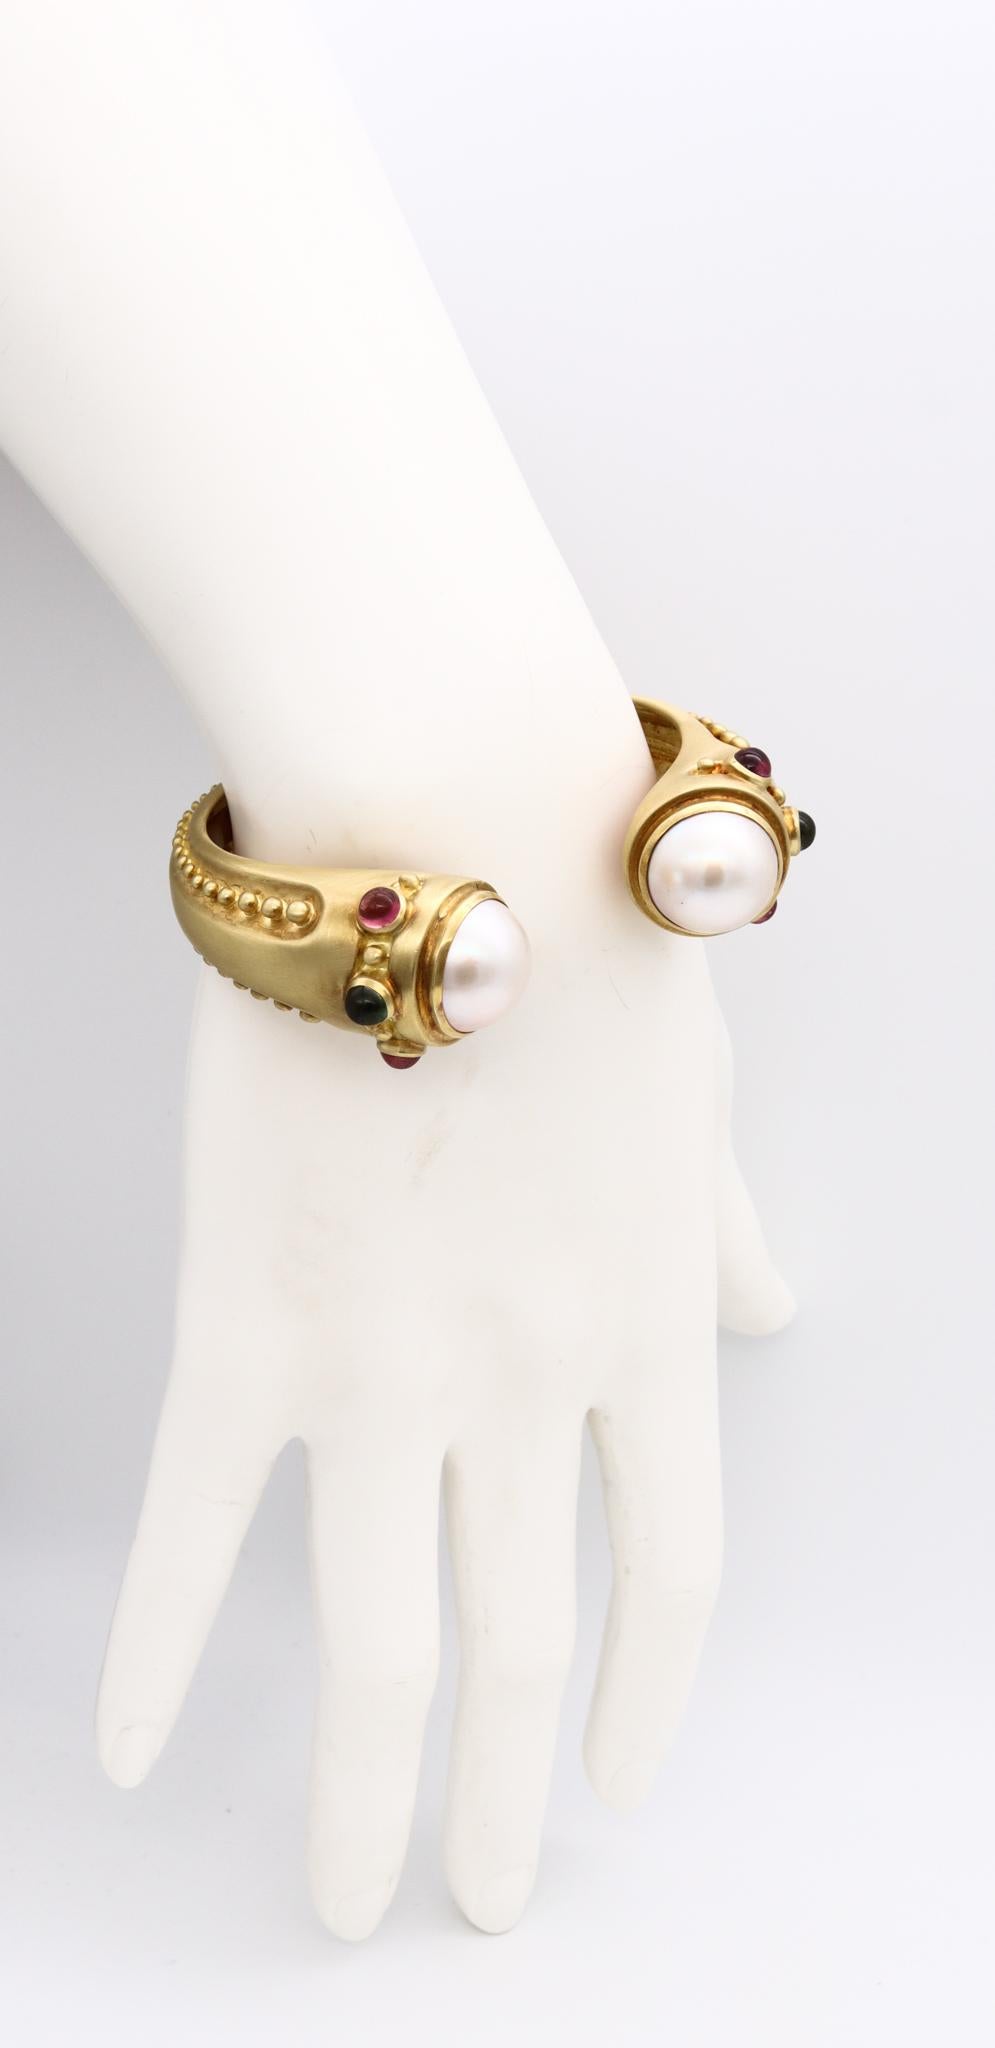 A jeweled cuff bracelet designed by Marlene Stowe.

Very handsome and colorful Etruscan Revival piece, crafted in New York city in solid 18 karats yellow gold with rich brushed finish. Is suited with a tension secure lock system.

Mounted with a